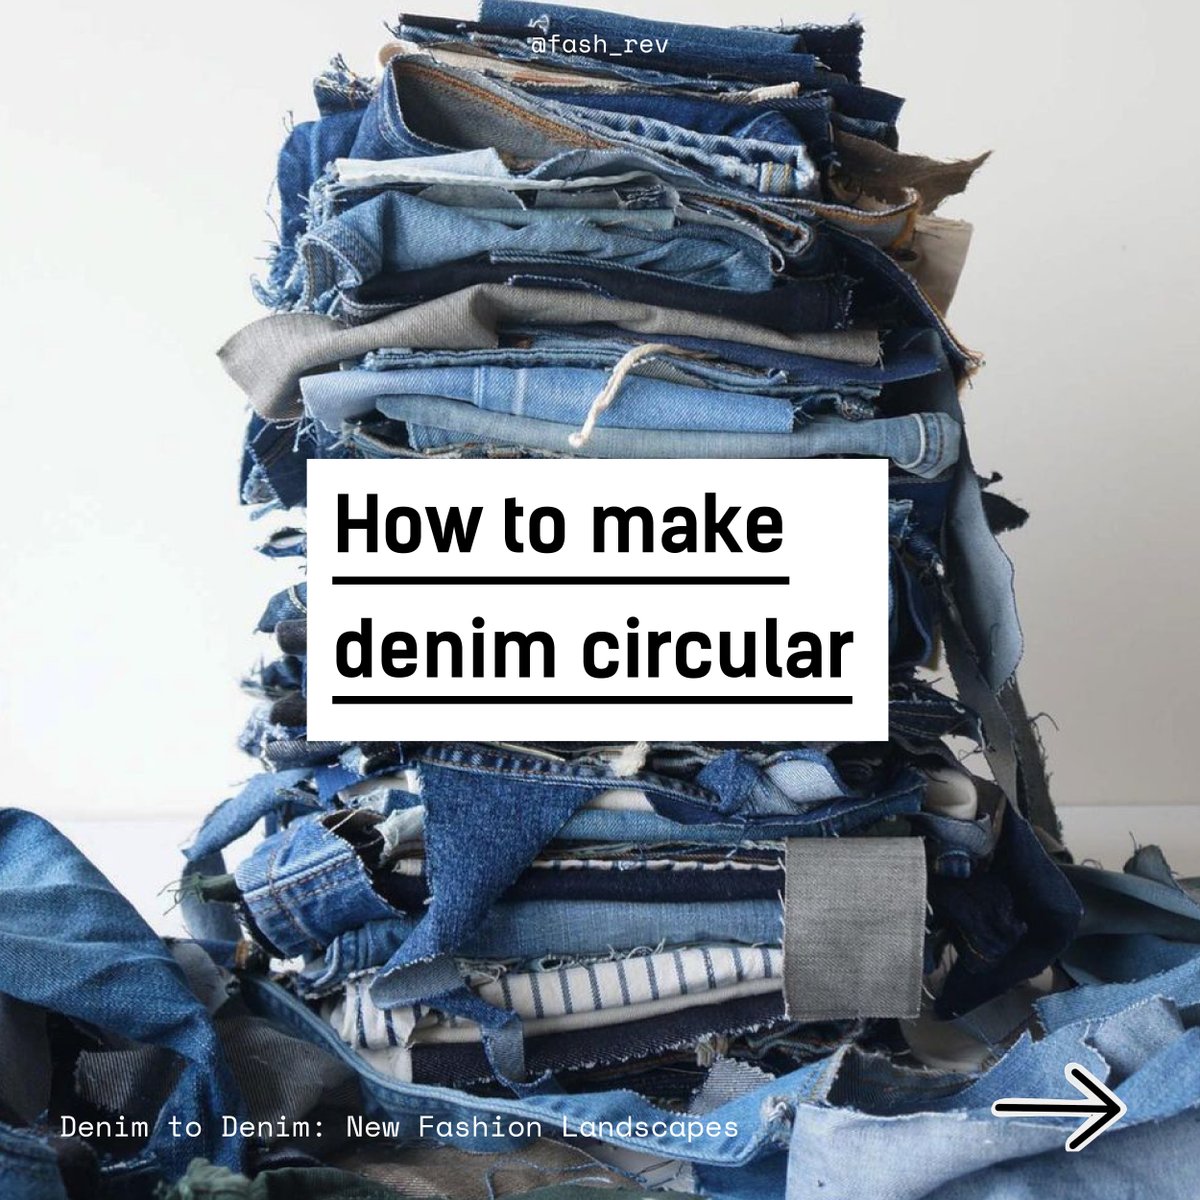 Together with #FashionRevolutionNigeria we are excited to share #DenimToDenim, a report investigating circular denim practices can work towards an equitable, fair and just fashion industry
 
Find out more: ow.ly/8TcS50Jc3wu